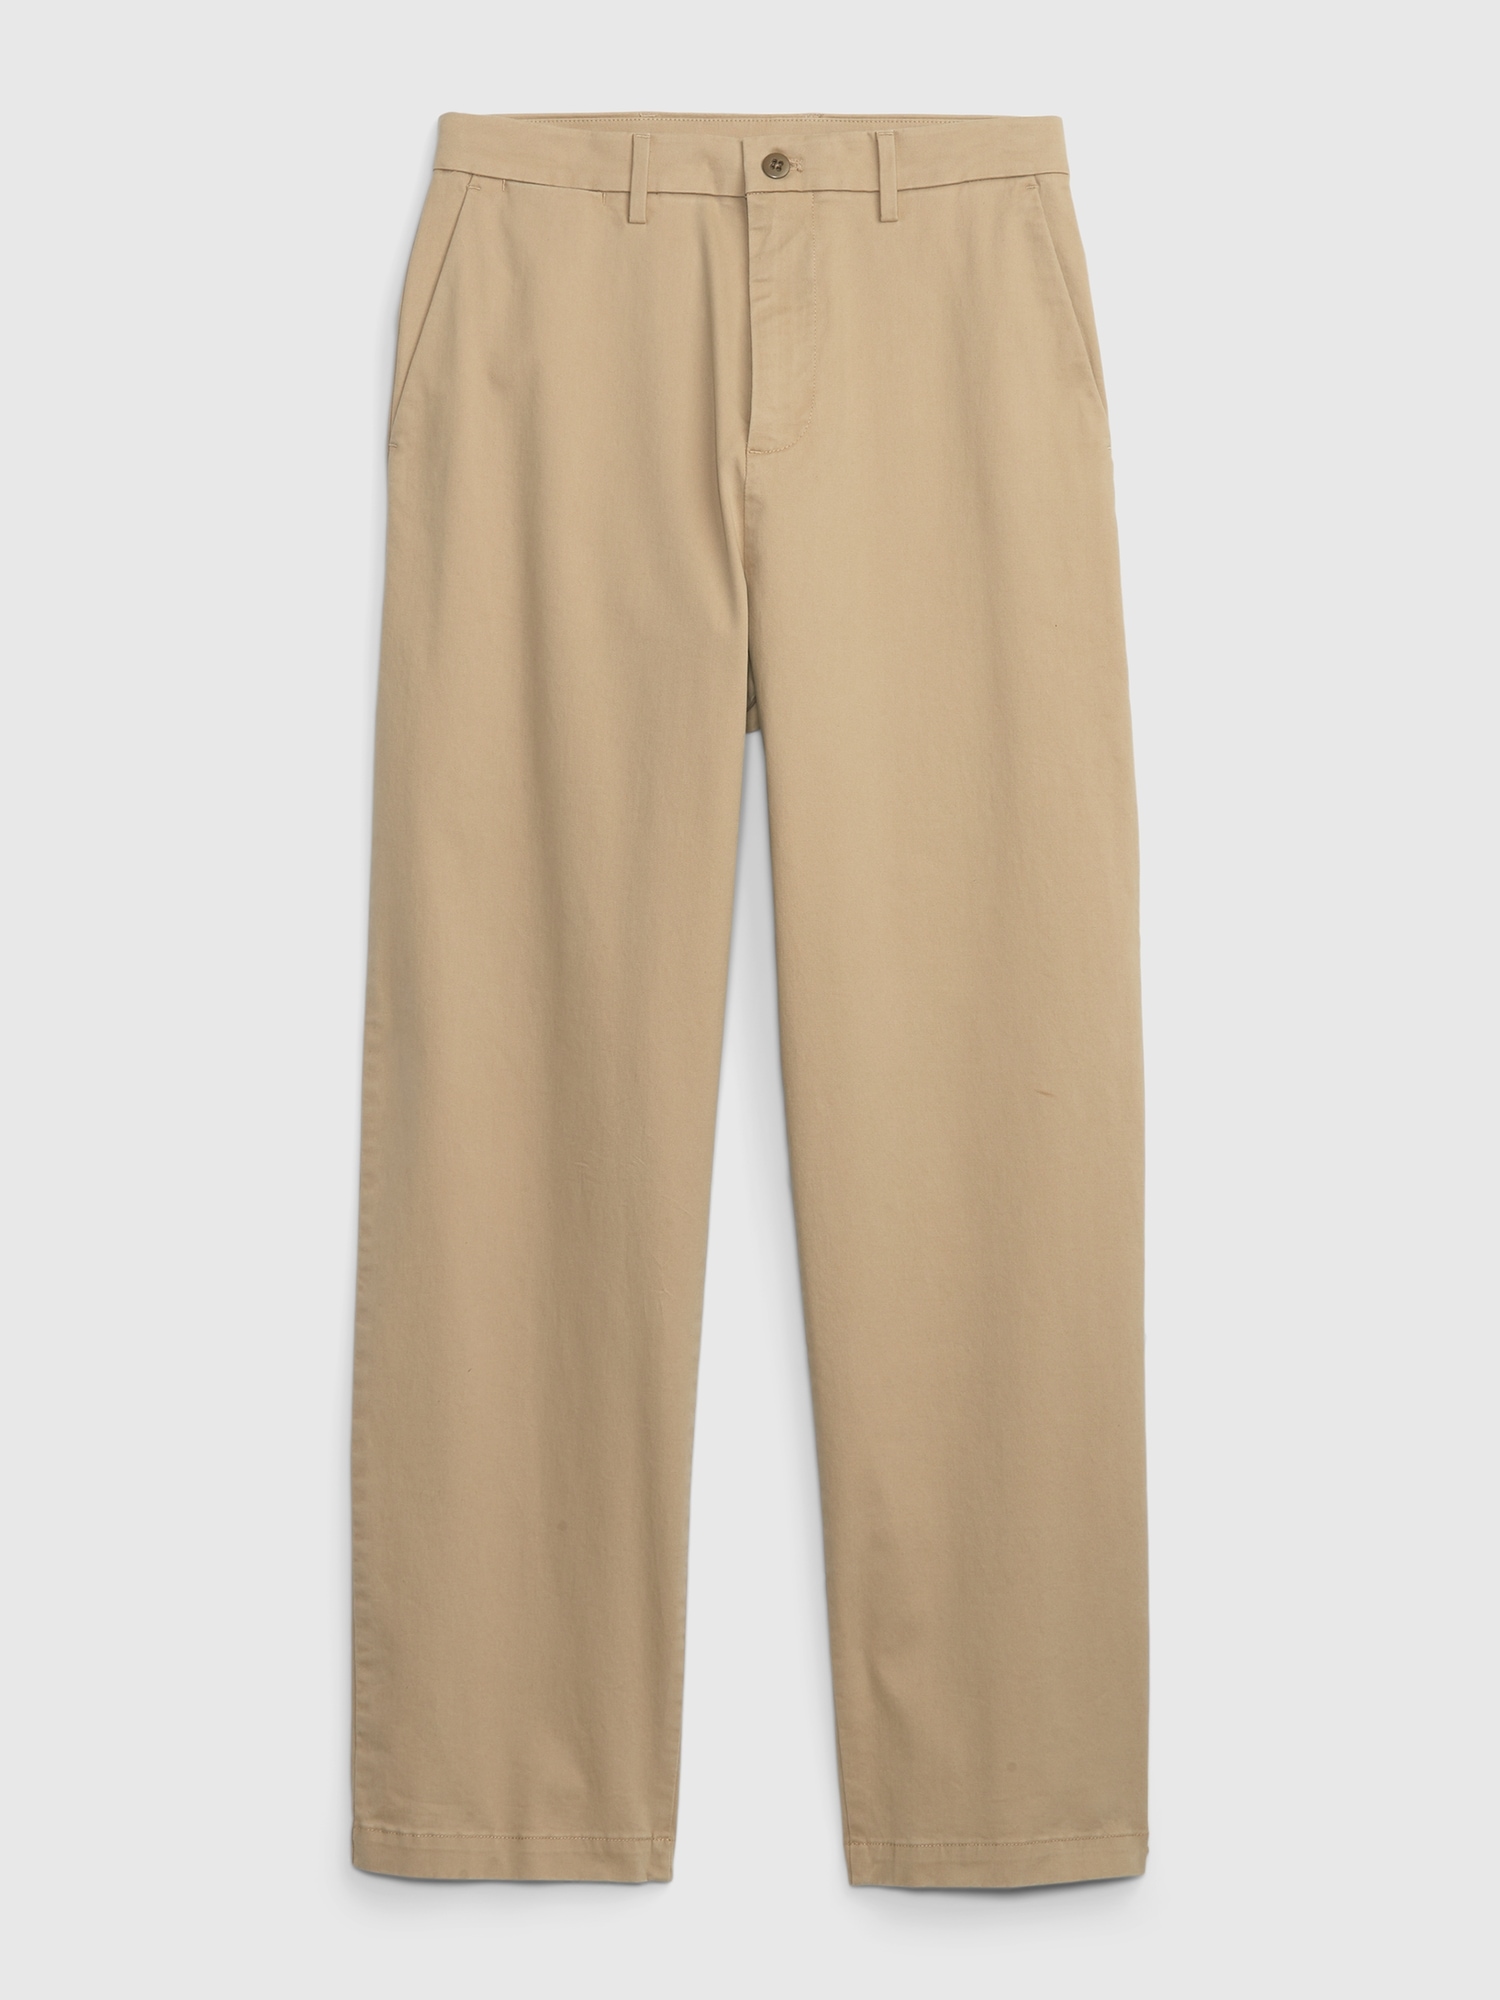 Modern Khakis in Baggy Fit with GapFlex | Gap